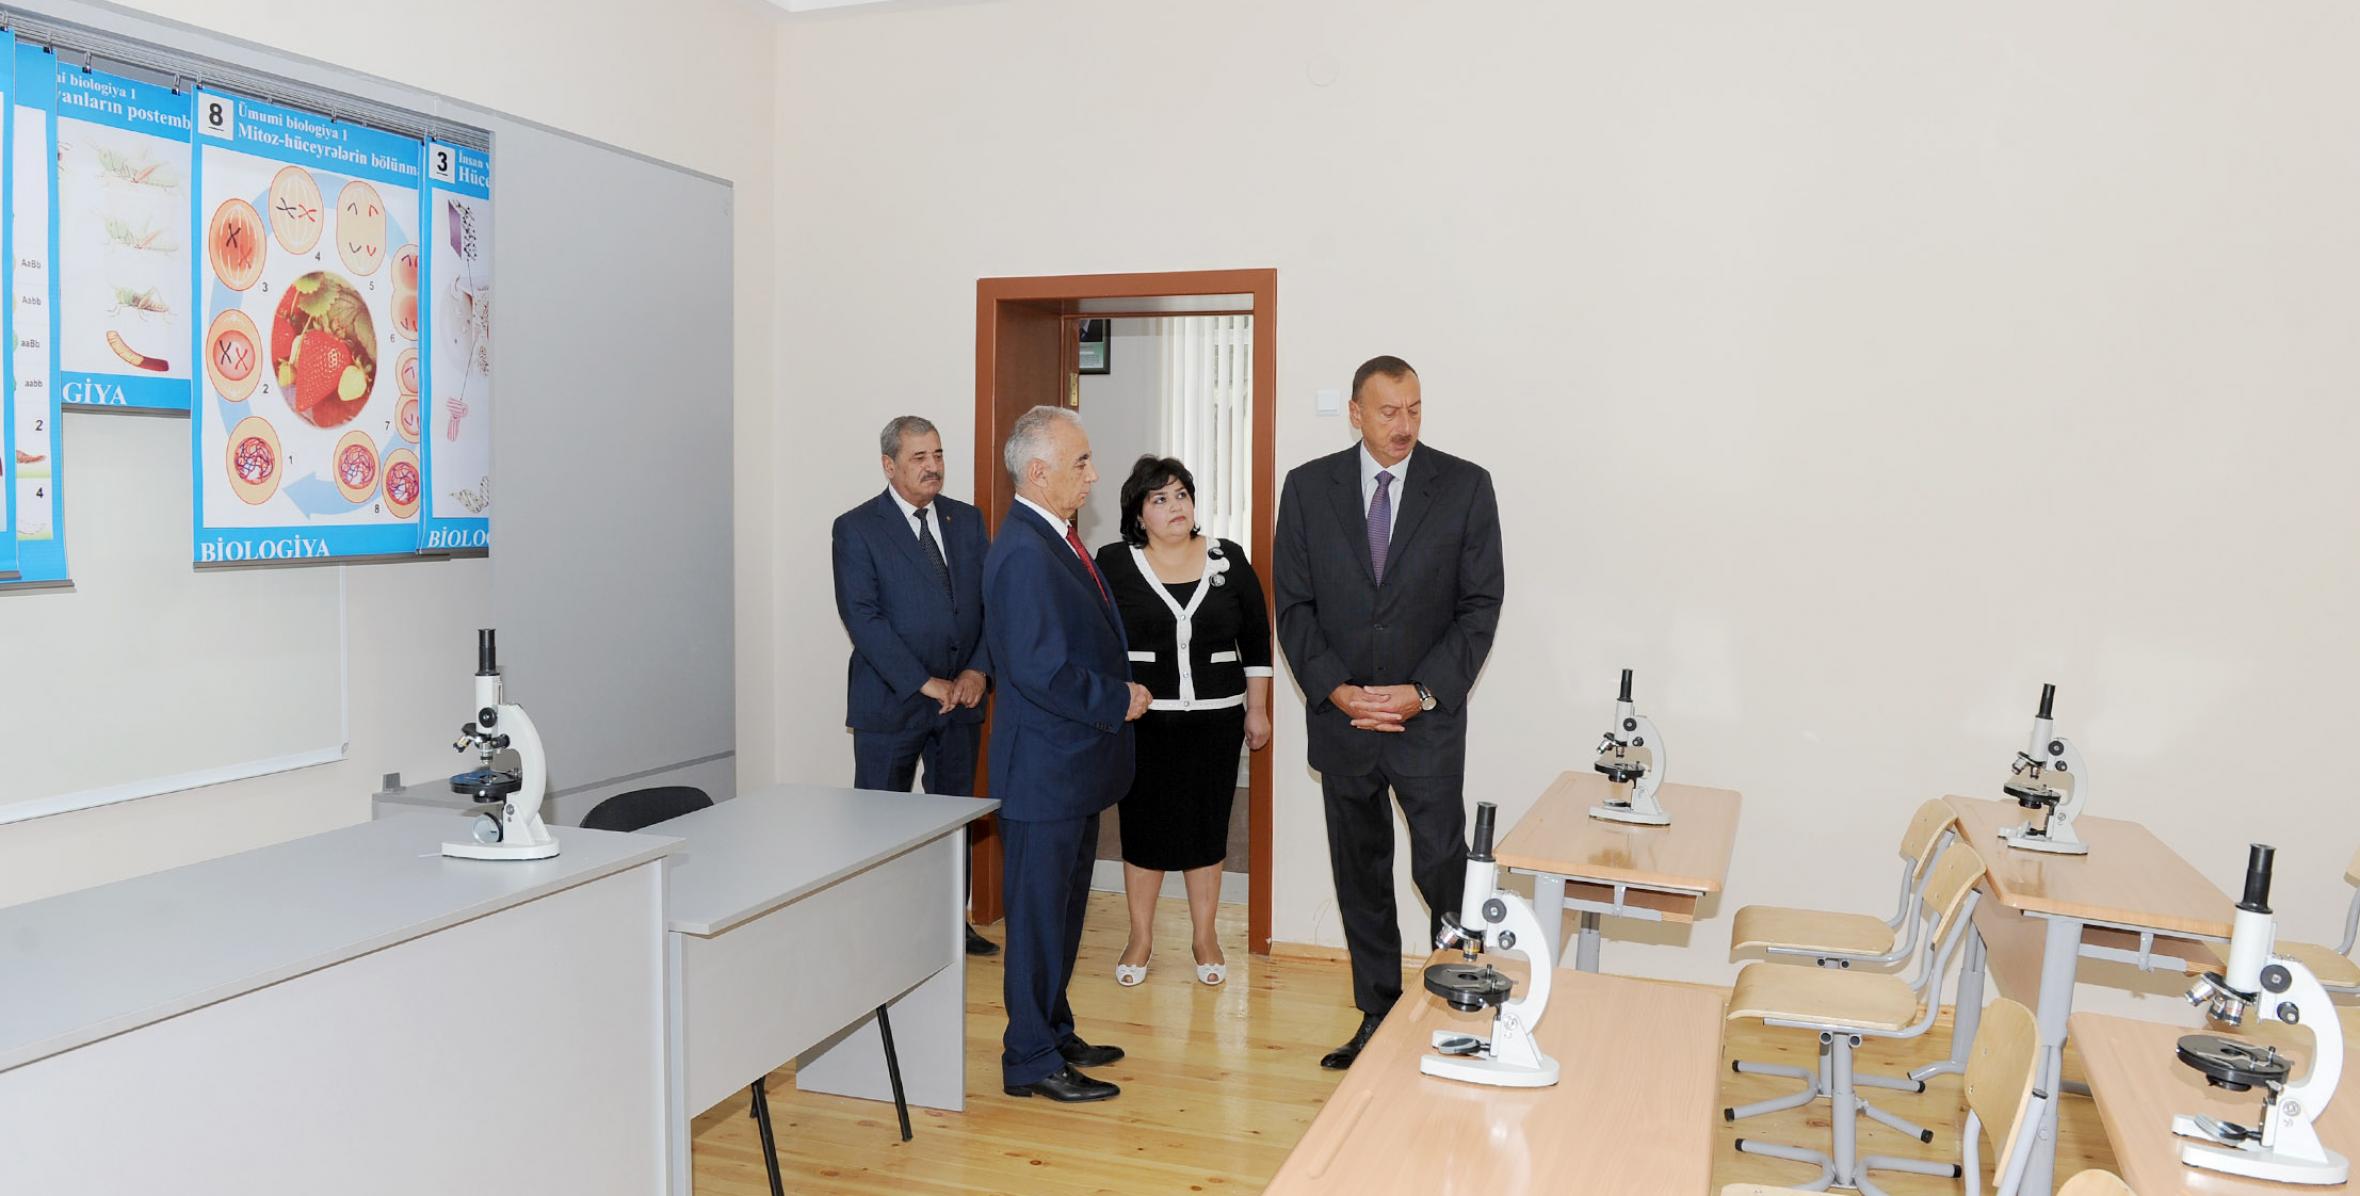 Ilham Aliyev reviewed the overhaul and reconstruction of secondary general school No 31 in the Yasamal district of Baku